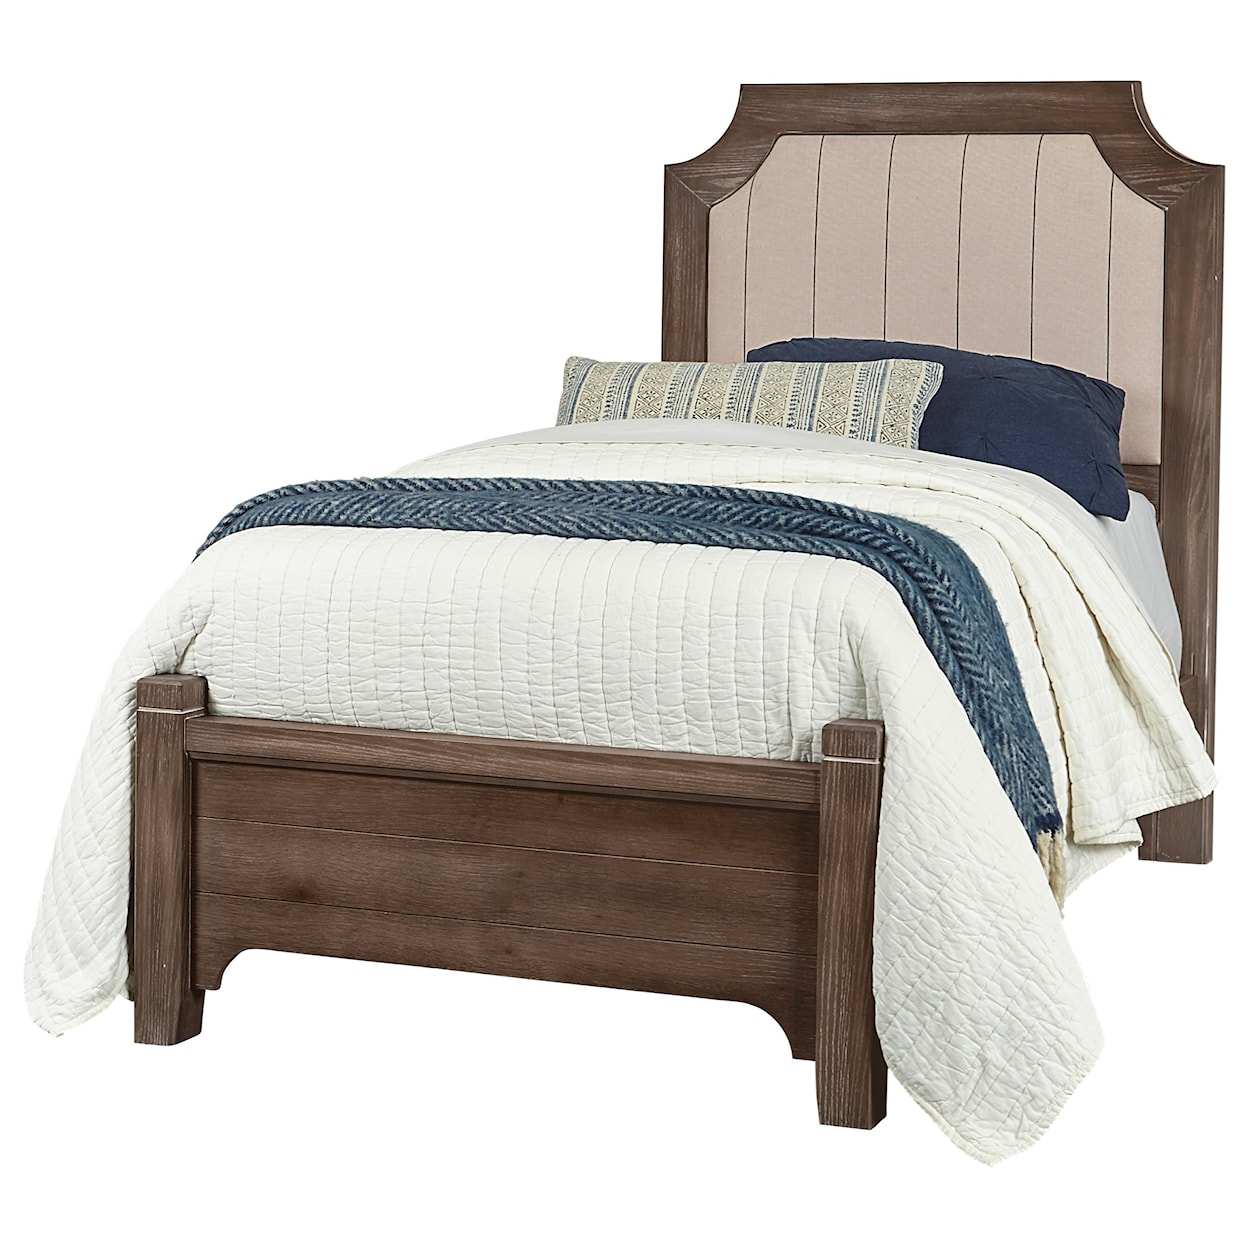 Laurel Mercantile Co. Bungalow Twin Upholstered Bed